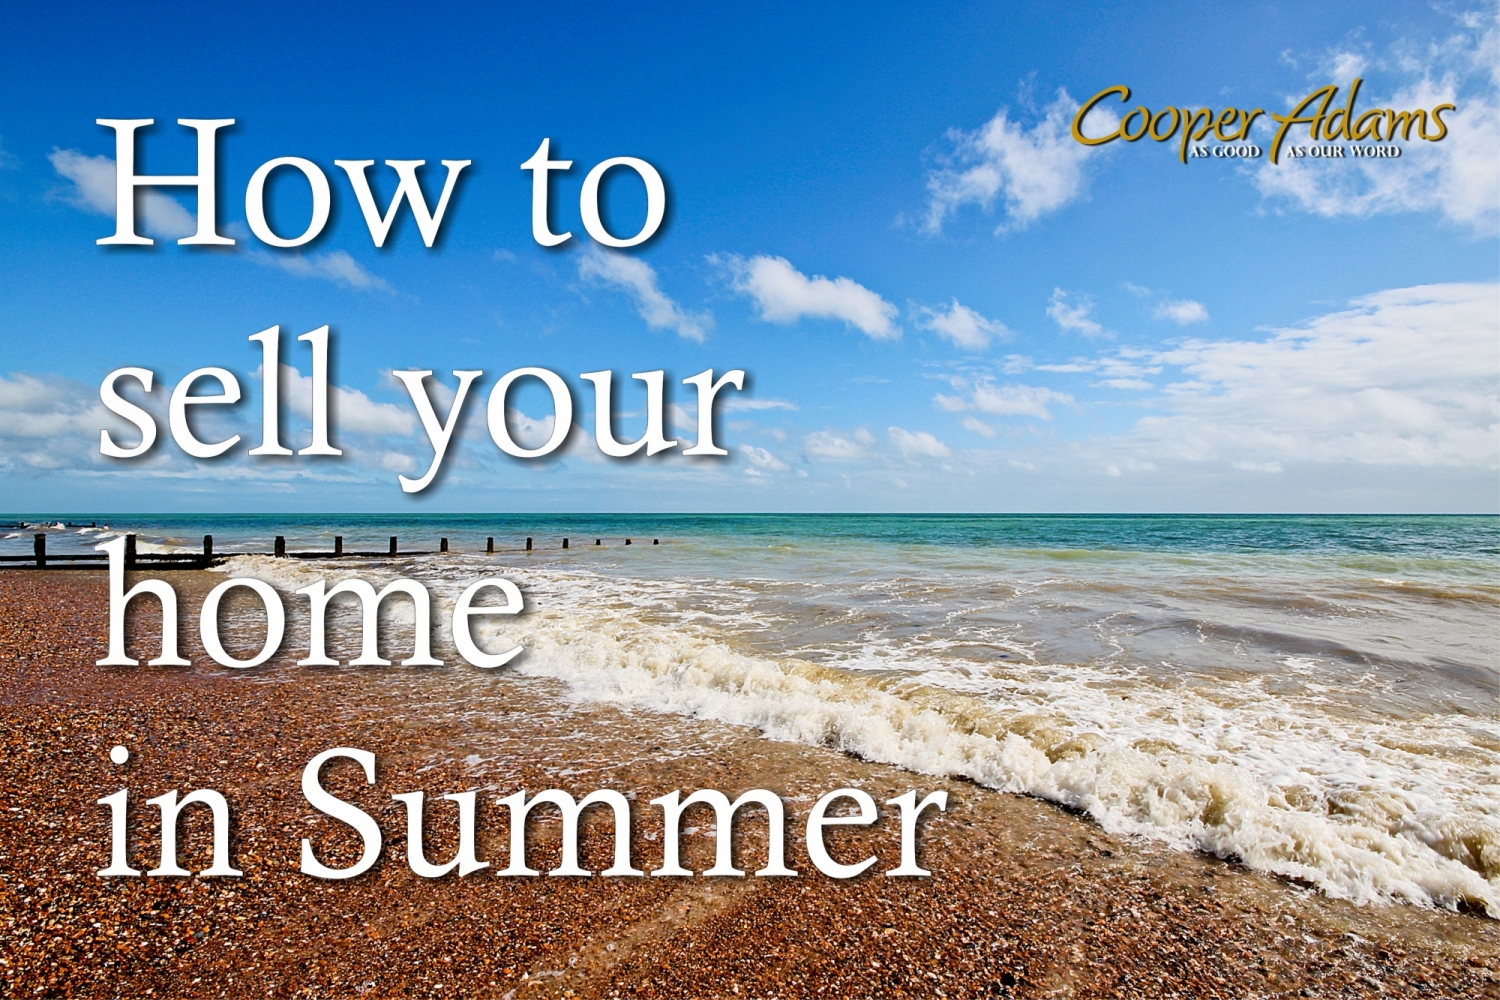 How to sell your home in t...